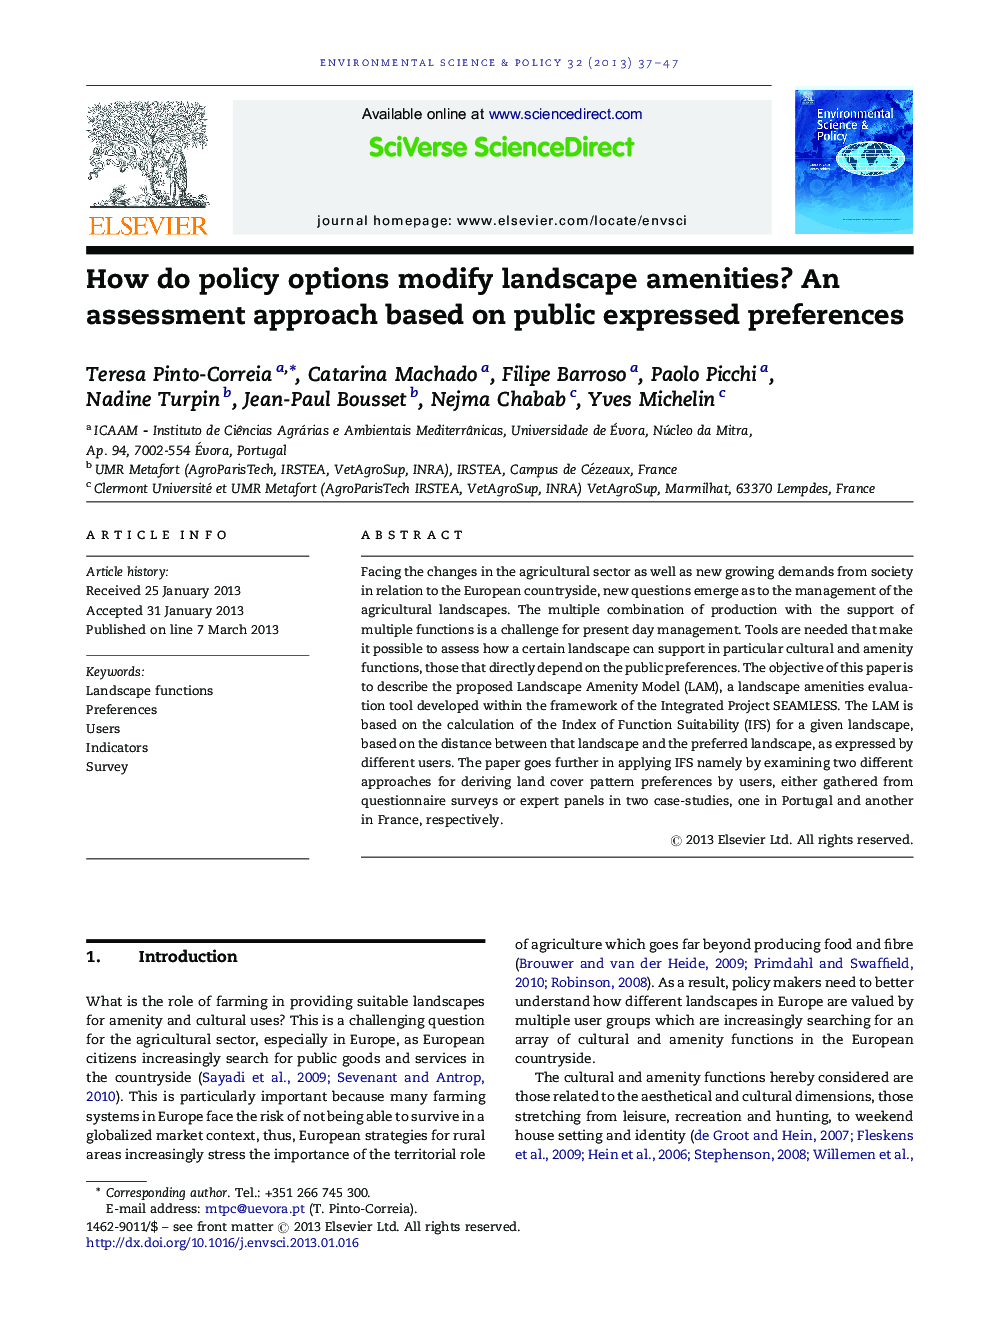 How do policy options modify landscape amenities? An assessment approach based on public expressed preferences